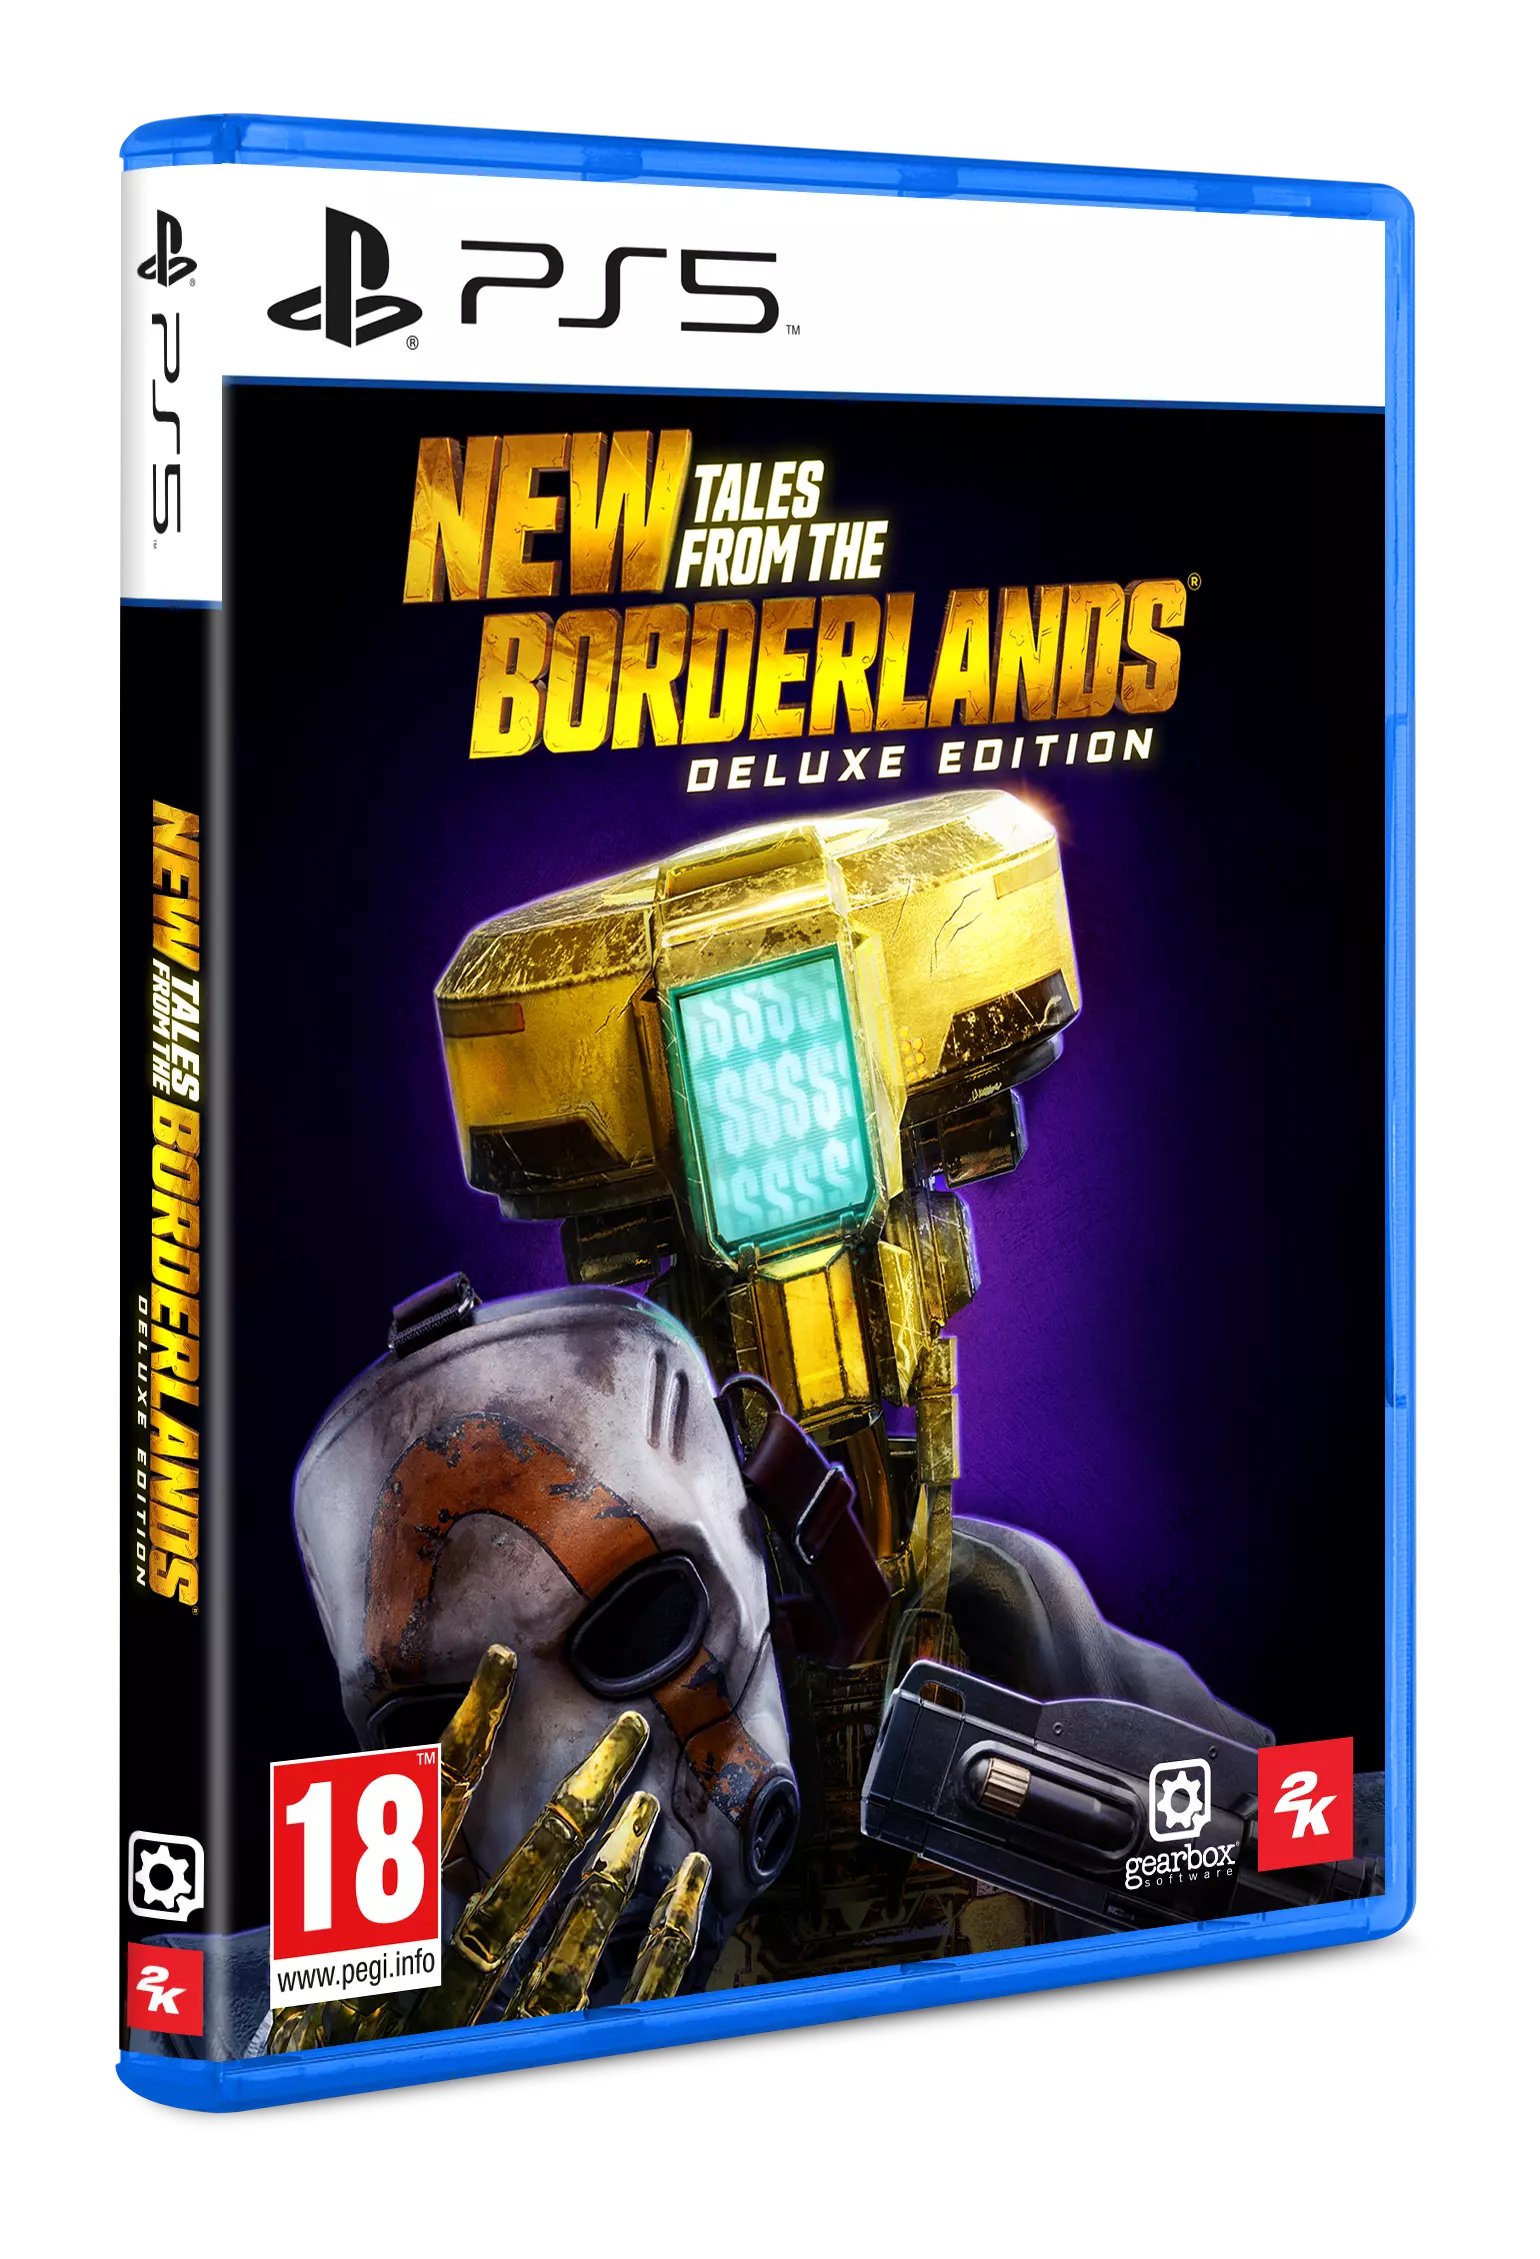 PS5 New Tales From The Borderlands Deluxe Edition